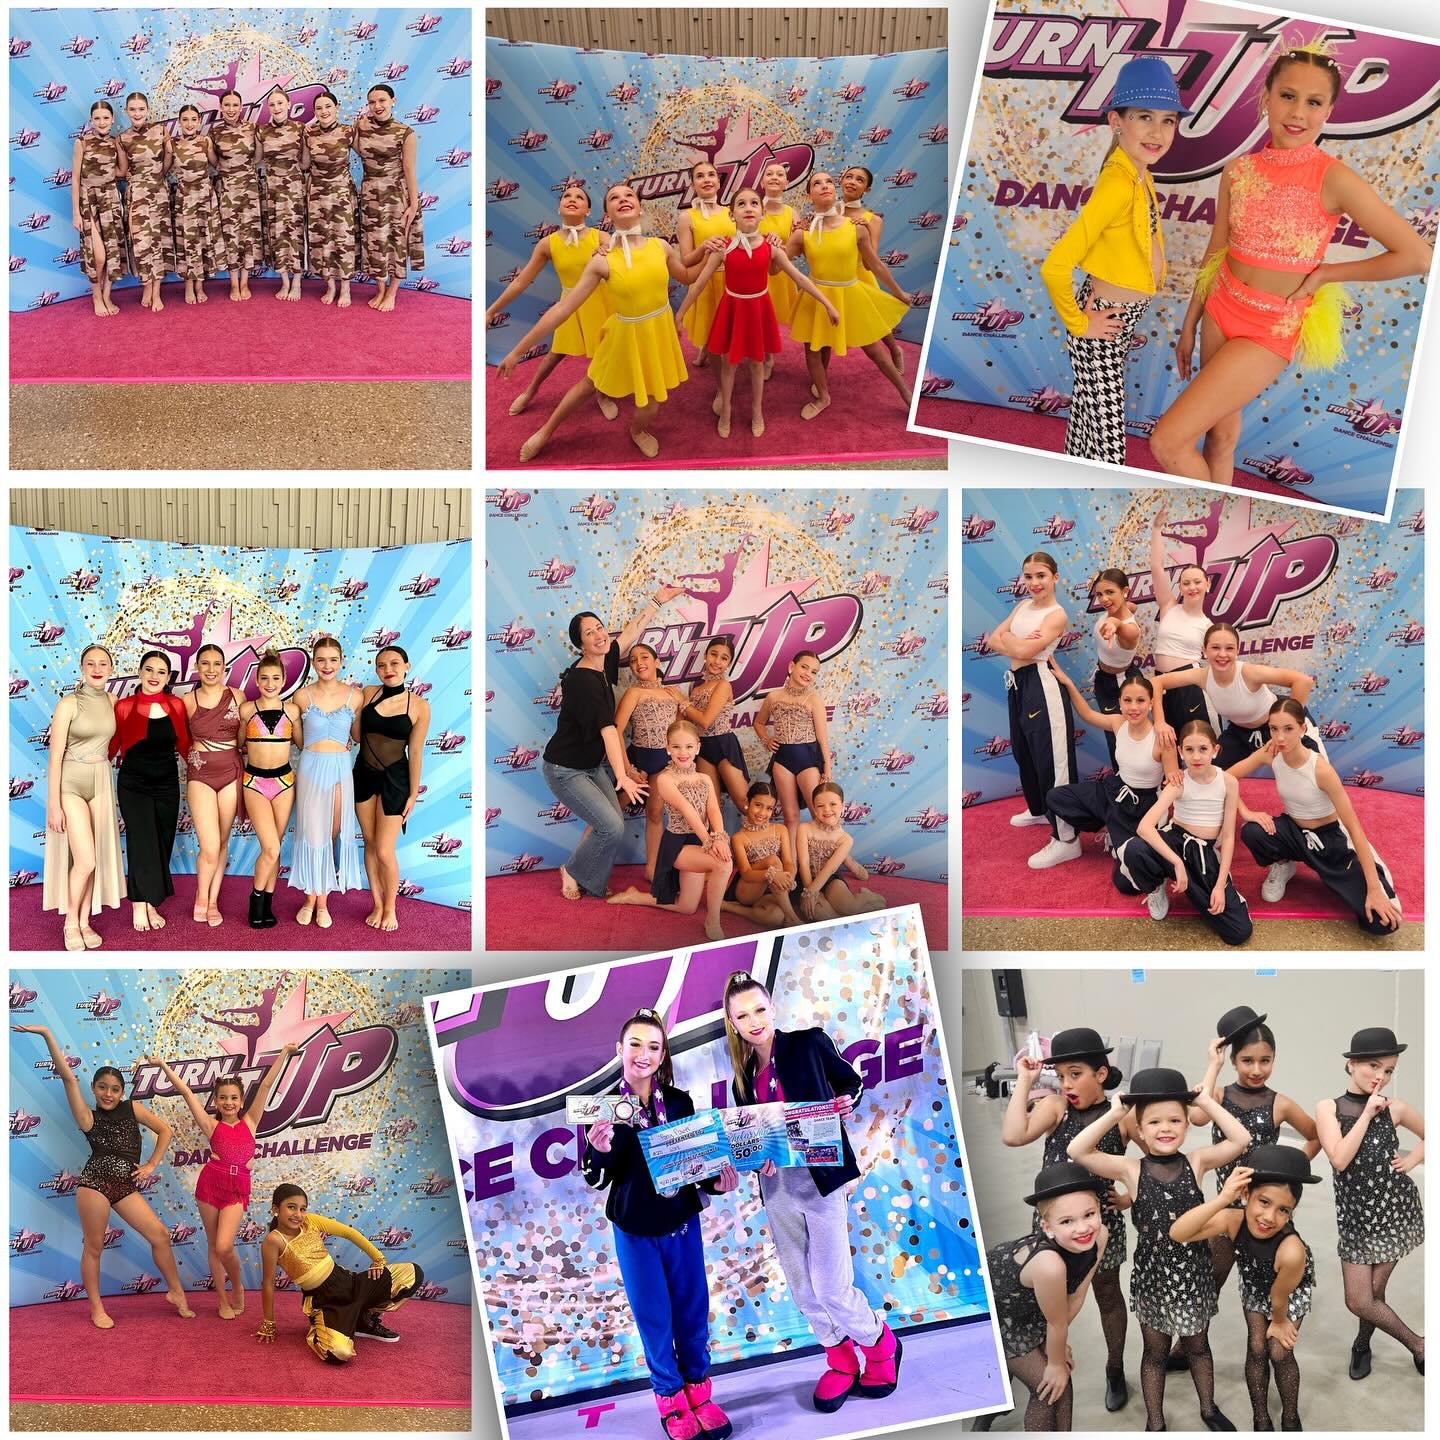 We are so proud of our MDS Company Stars who performed @turnitupdance last weekend! 💜🩵🩷

#passionartistrydance #discovertheartistwithin #allendancestudio #mckinneydancestudio #friscodancestudio #thedancestudionetwork